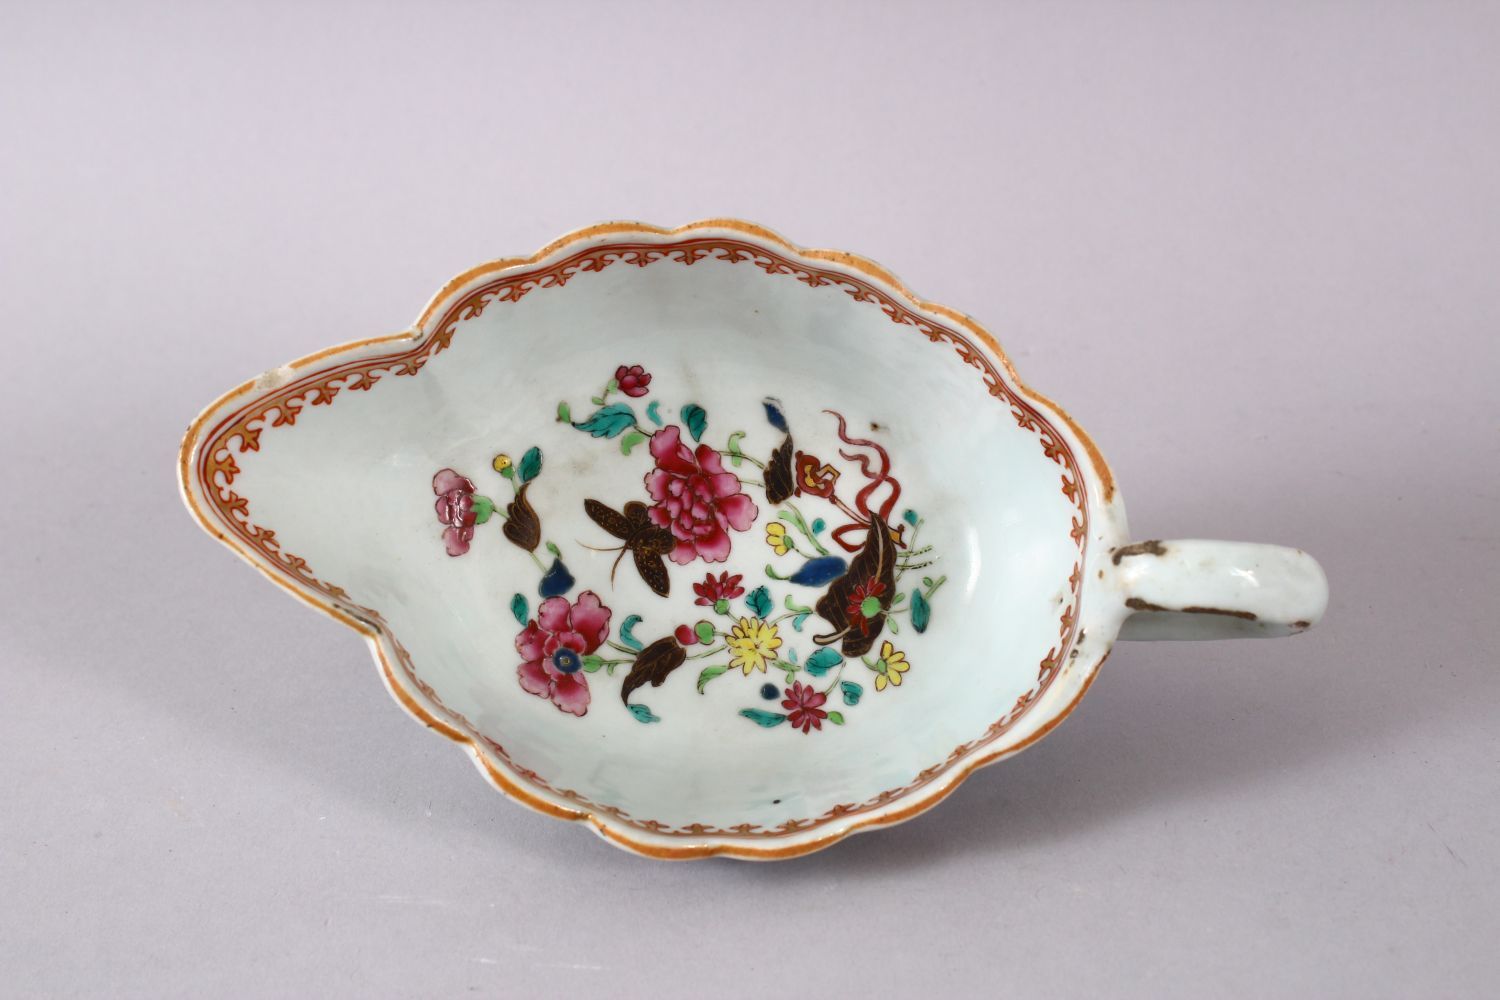 AN 18TH CENTURY CHINESE EXPORT FAMILLE ROSE PORCELAIN SAUCE BOAT, decorated with scenes of flora and - Image 2 of 3